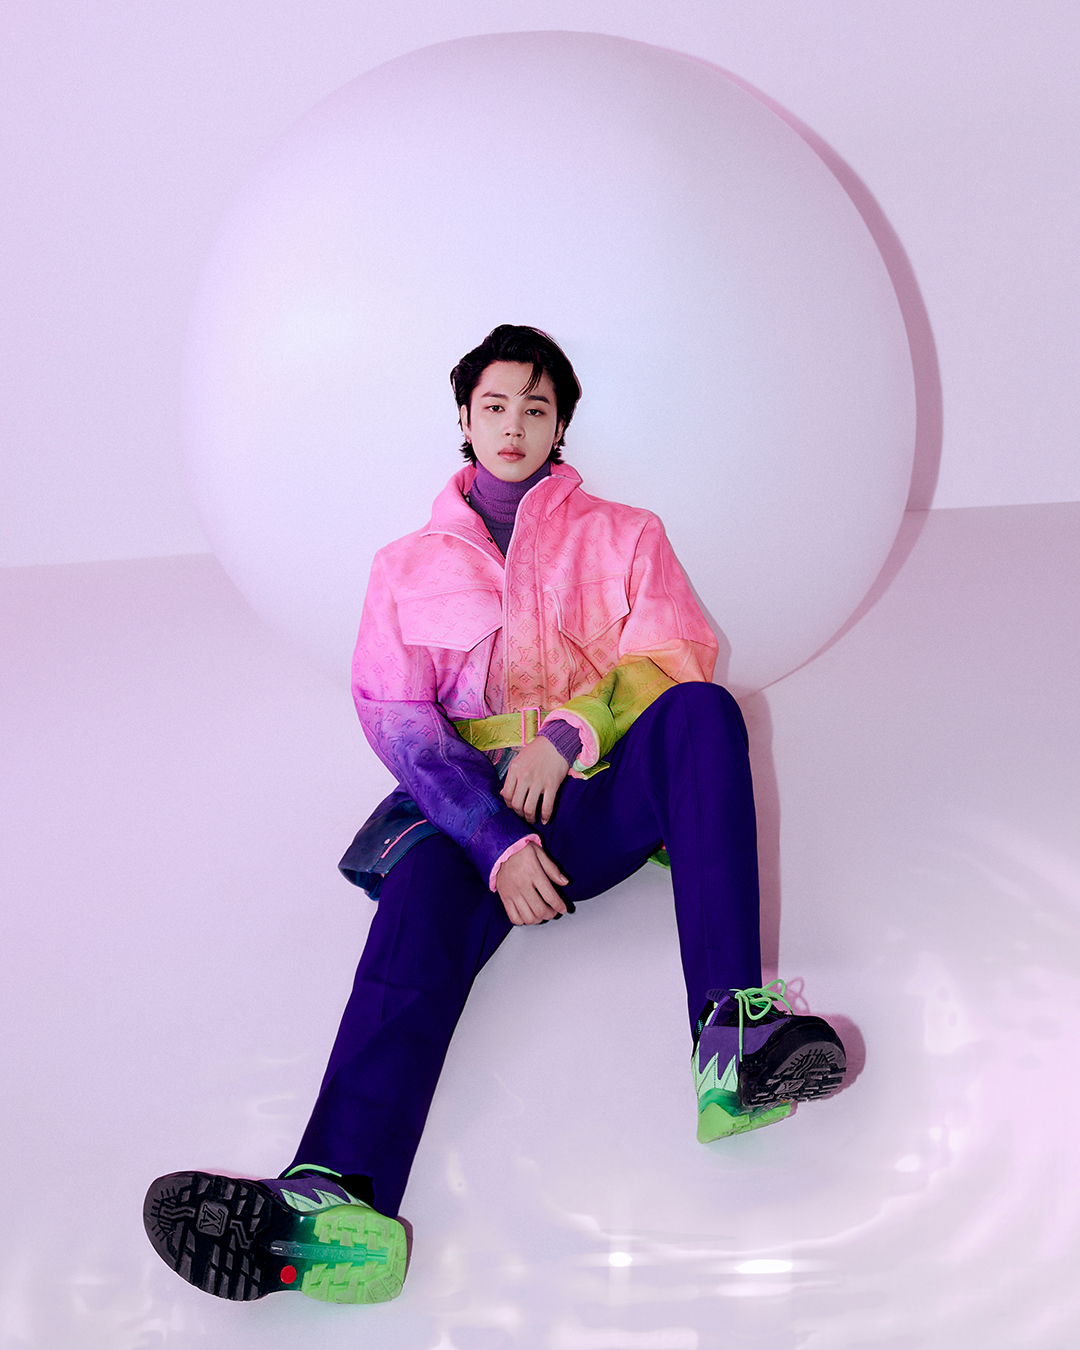 Louis Vuitton on X: #V in #LouisVuitton. The @bts_twt member and House  Ambassador is photographed for the January 2022 Special Editions of  @VogueKorea and @GQKorea in pieces from the #LVMenSS22 Collection by